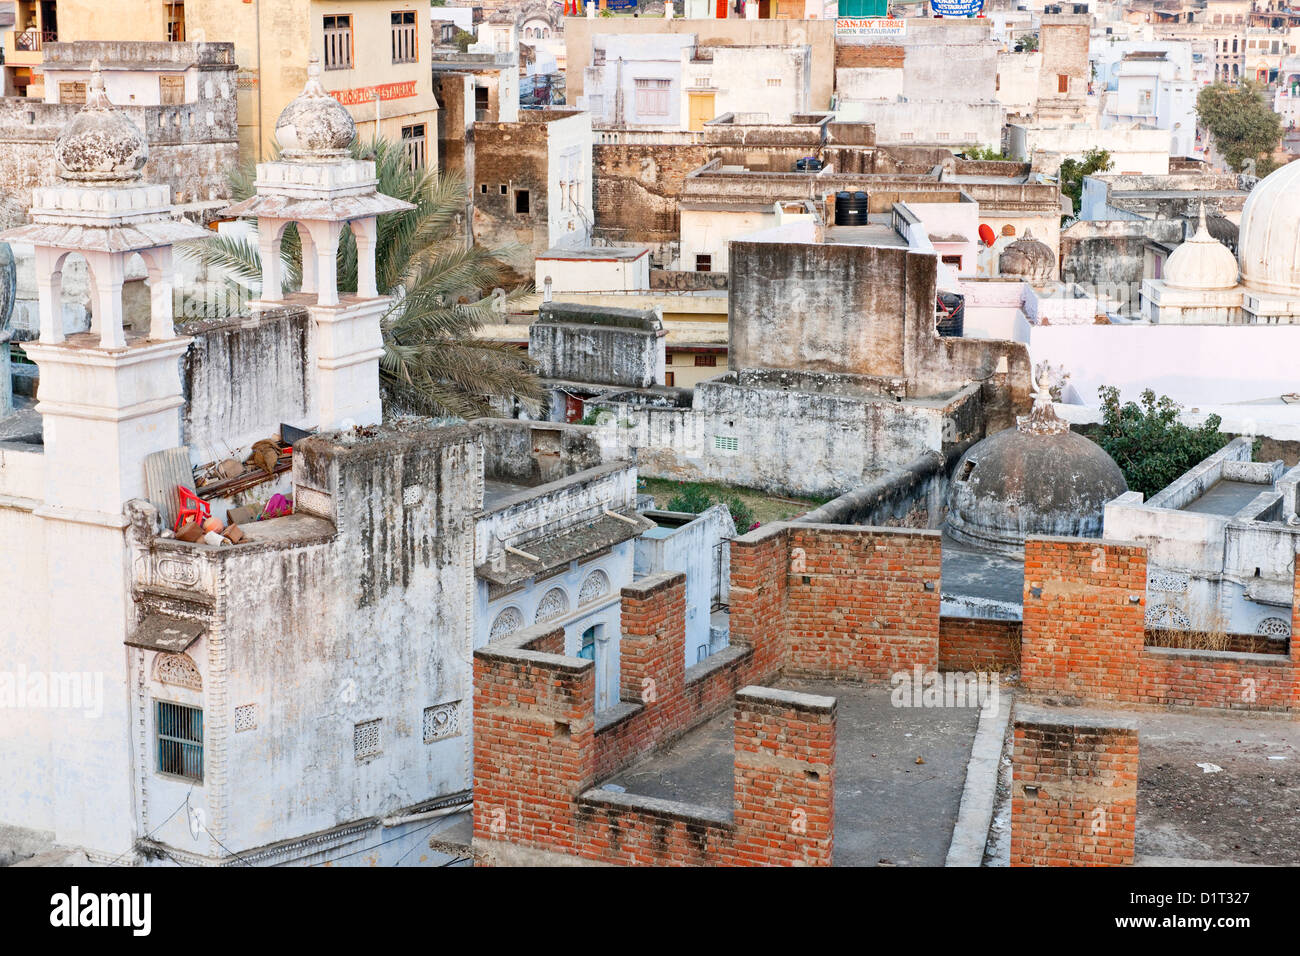 A view of the colorful rooftops of Pushkar  Rajasthan India with a red chair and geometric shapes of buildings Stock Photo